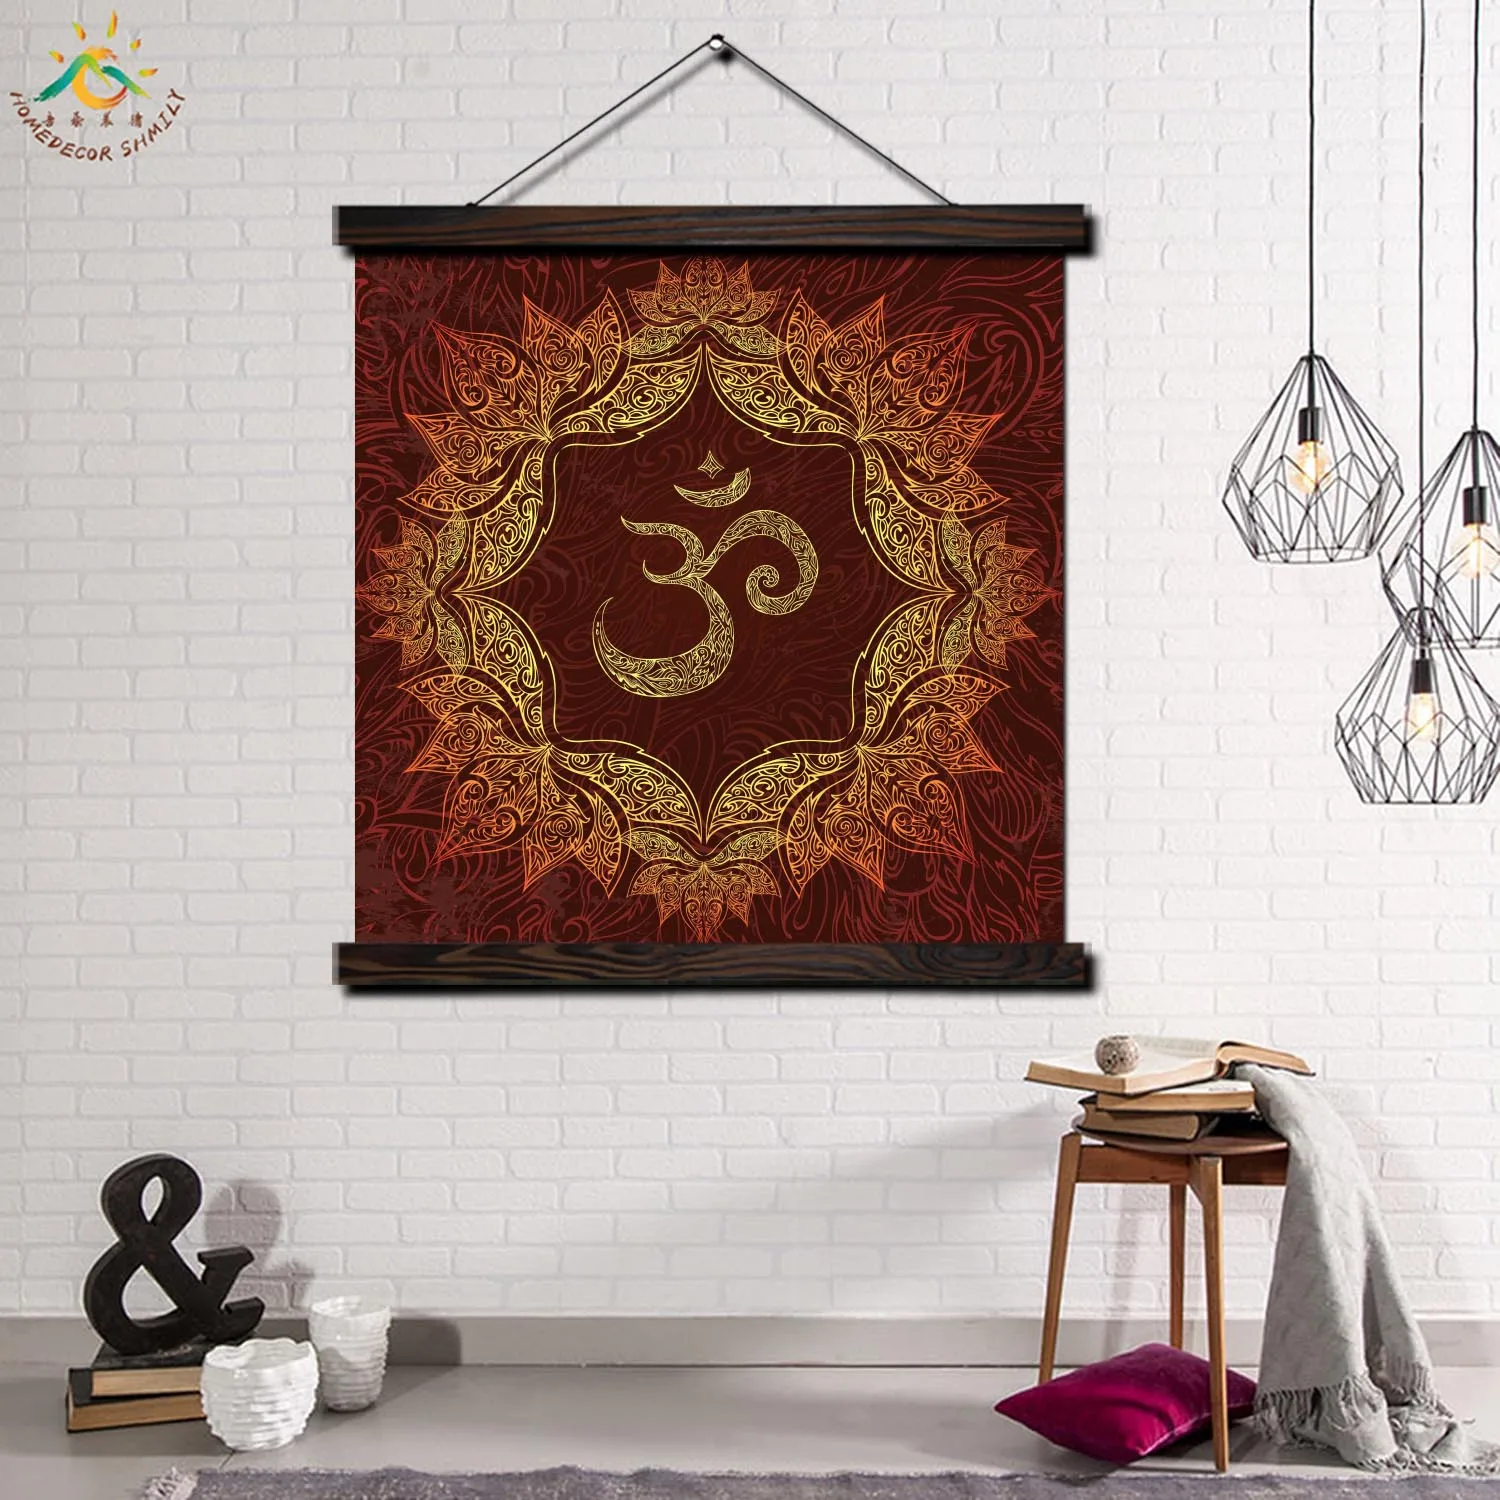 

Traditional Fonts Framed Scroll Painting Modern Prints Poster Wall Painting Artwork Wall Art Pictures Home Decor